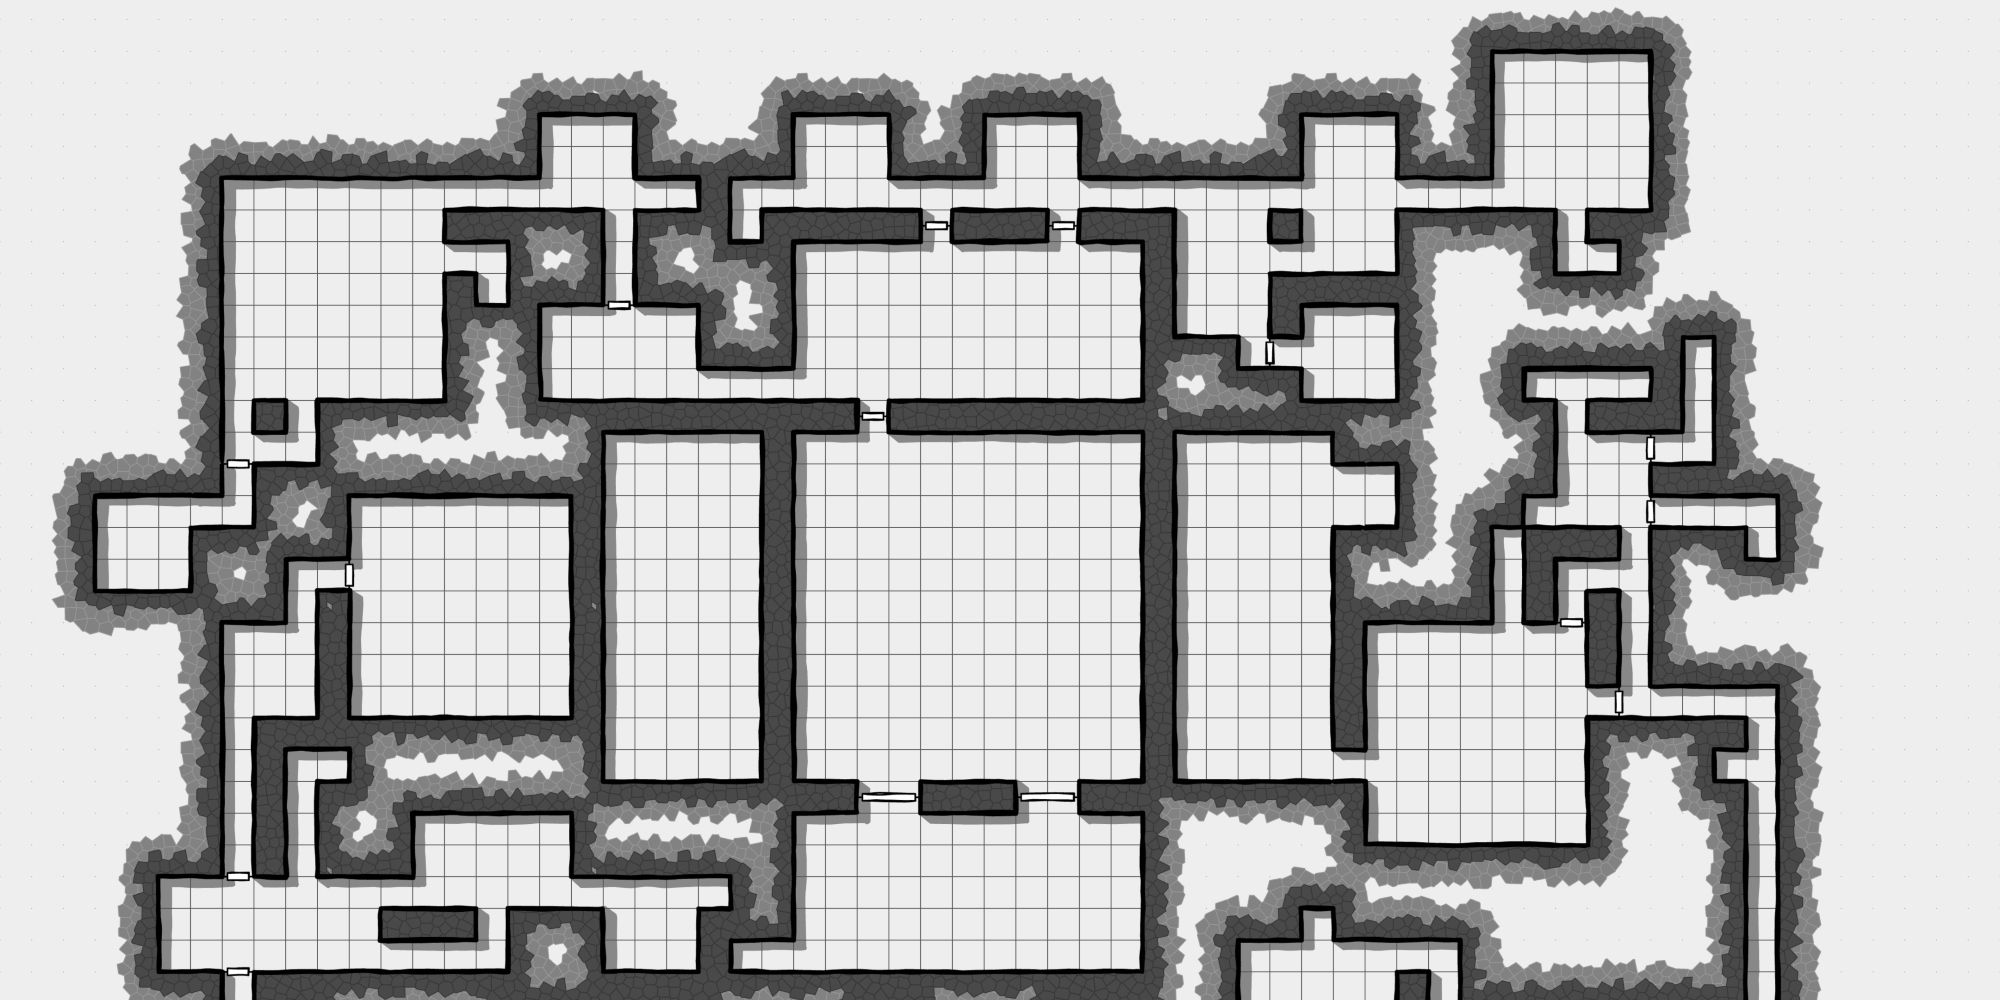 Black and white dungeon map with grid lines in rooms